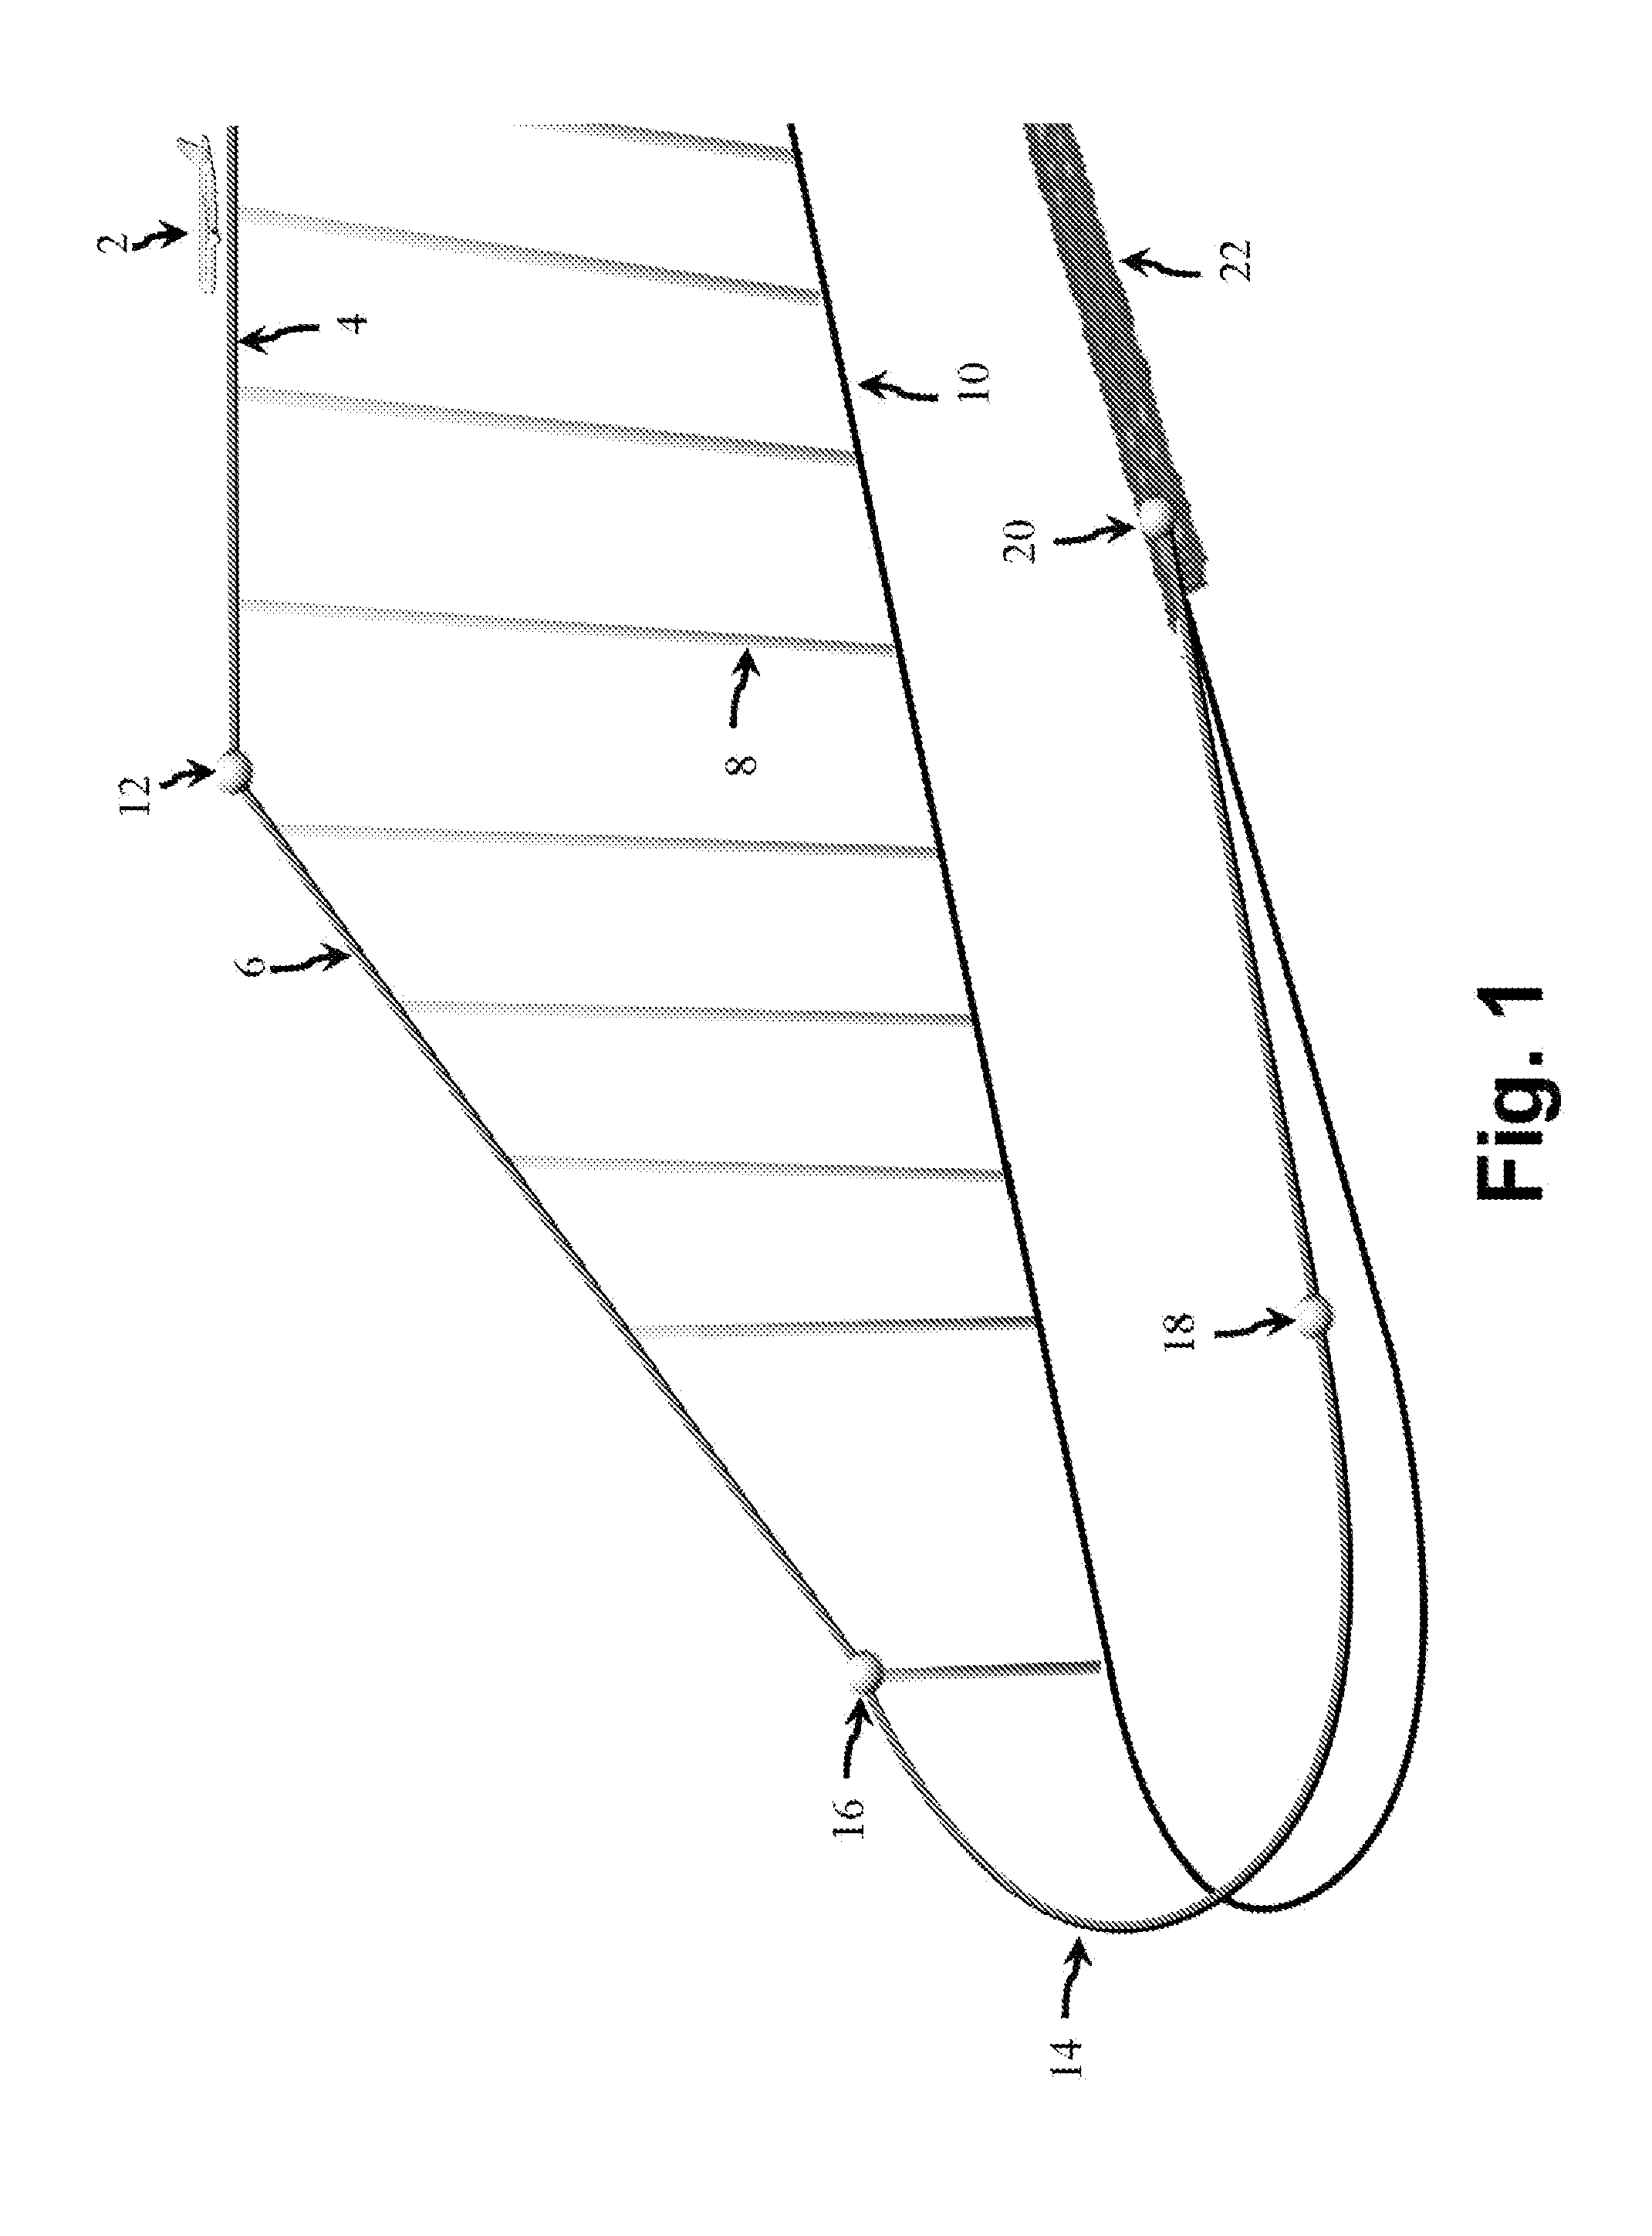 System and method for optimizing an aircraft trajectory